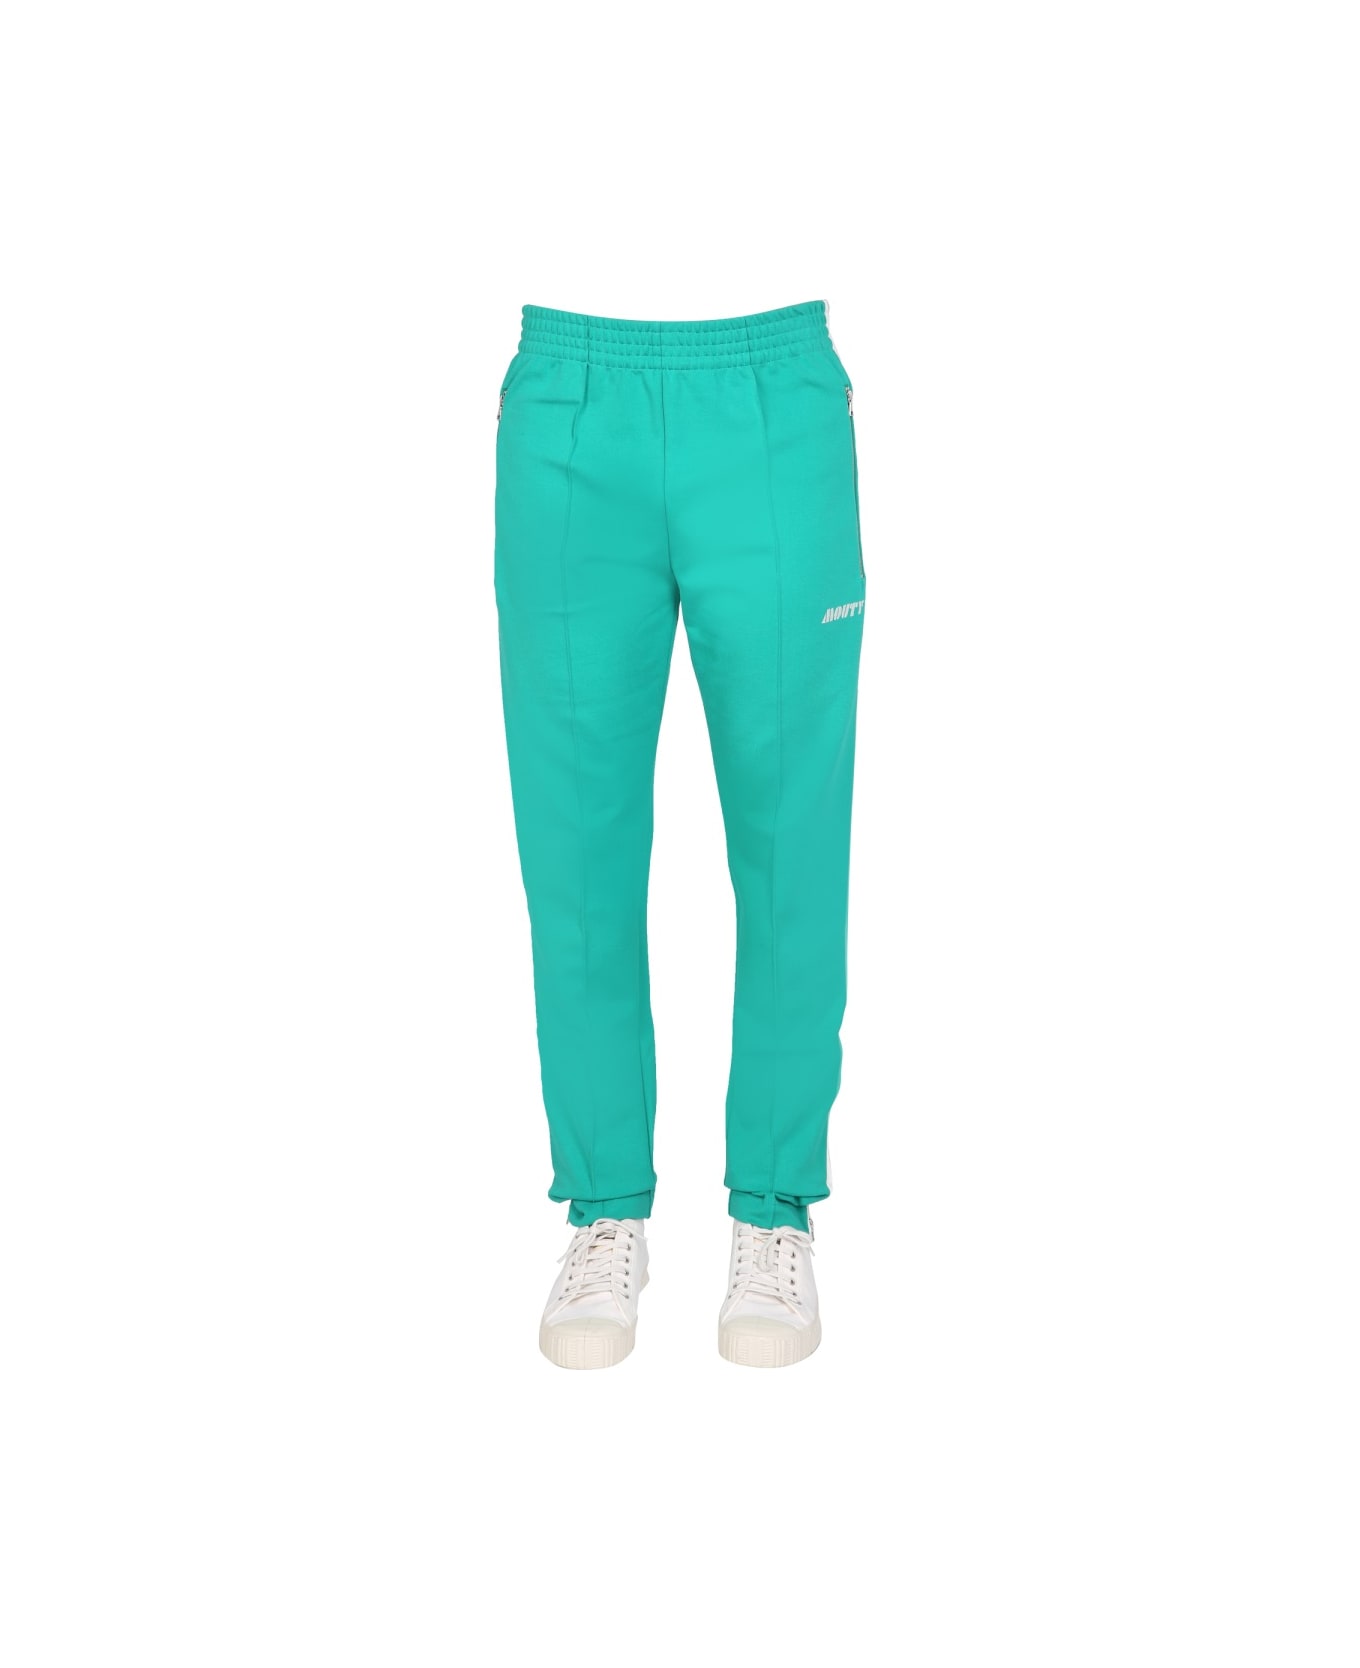 Mouty Logo Embroidery Jogging Pants - GREEN